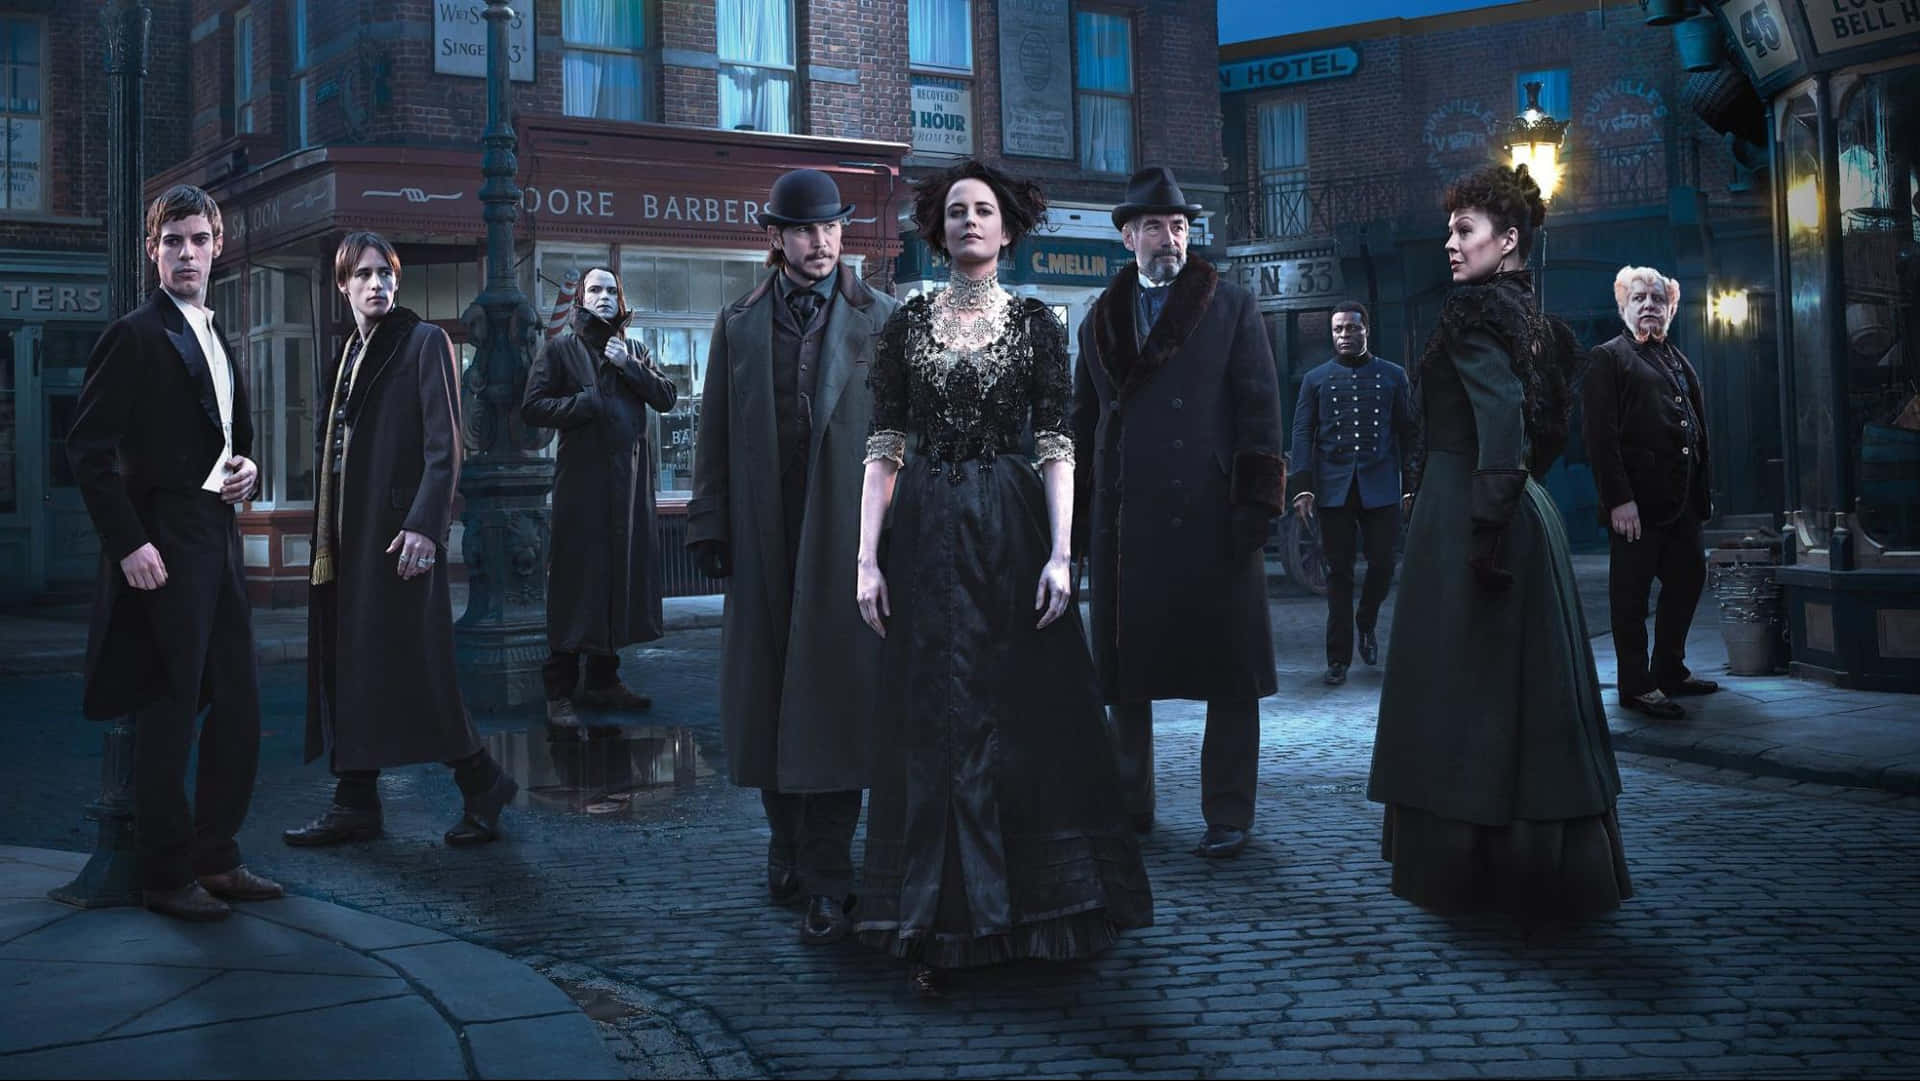 Characters Of Penny Dreadful In An Atrocious Place Wallpaper